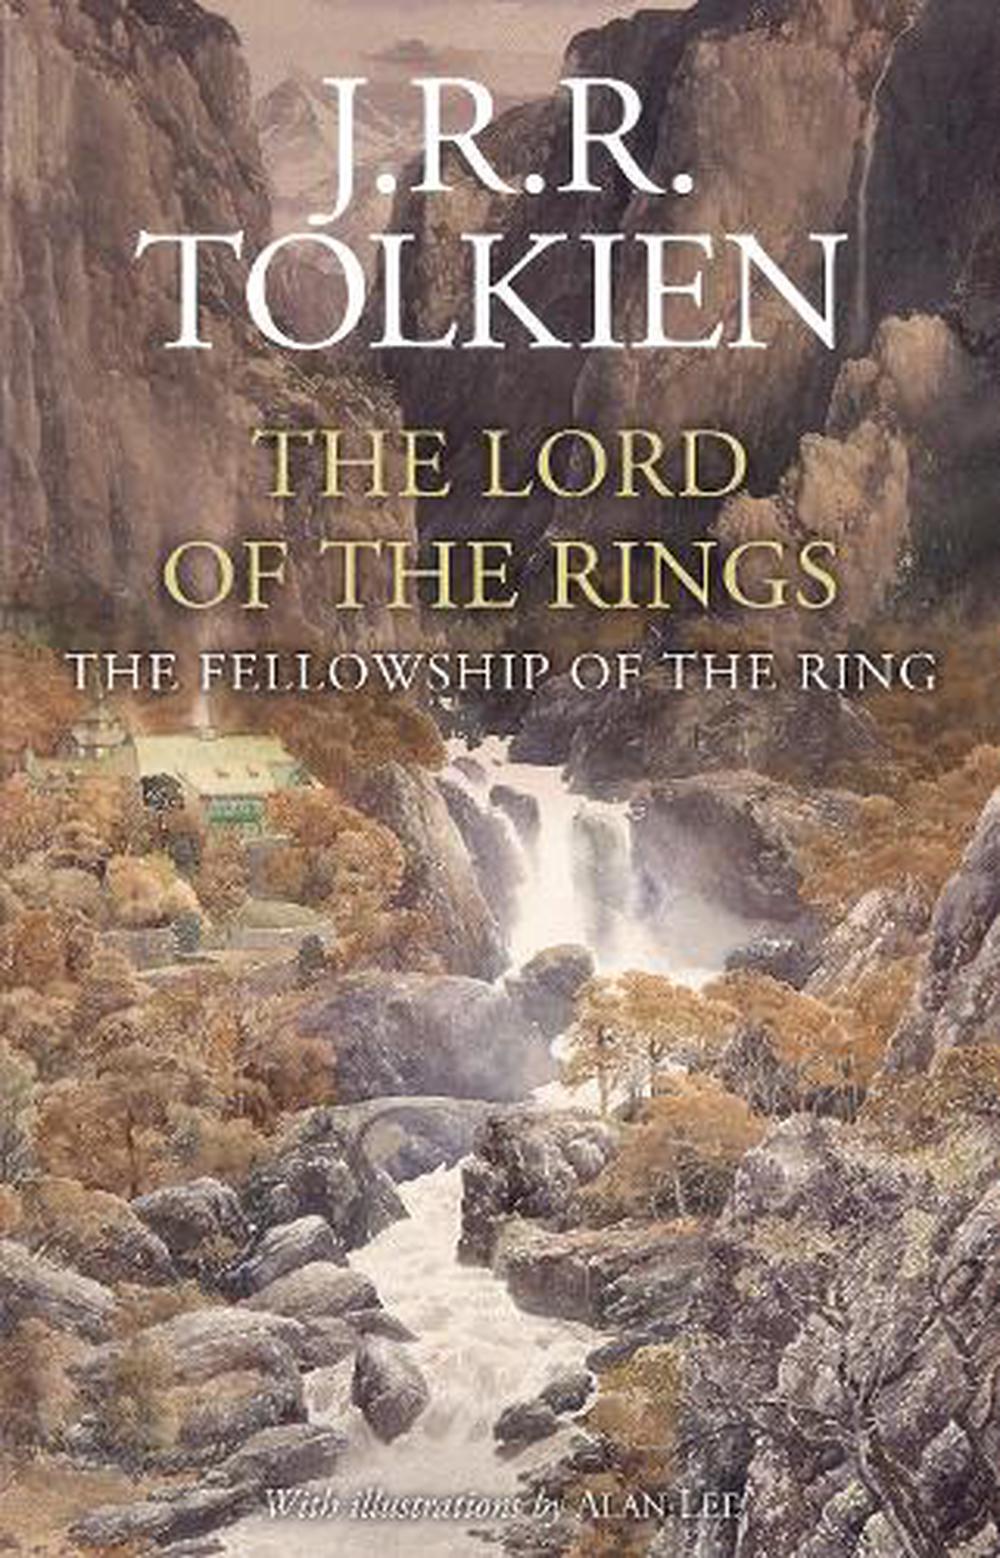 book review lord of the rings fellowship of the ring